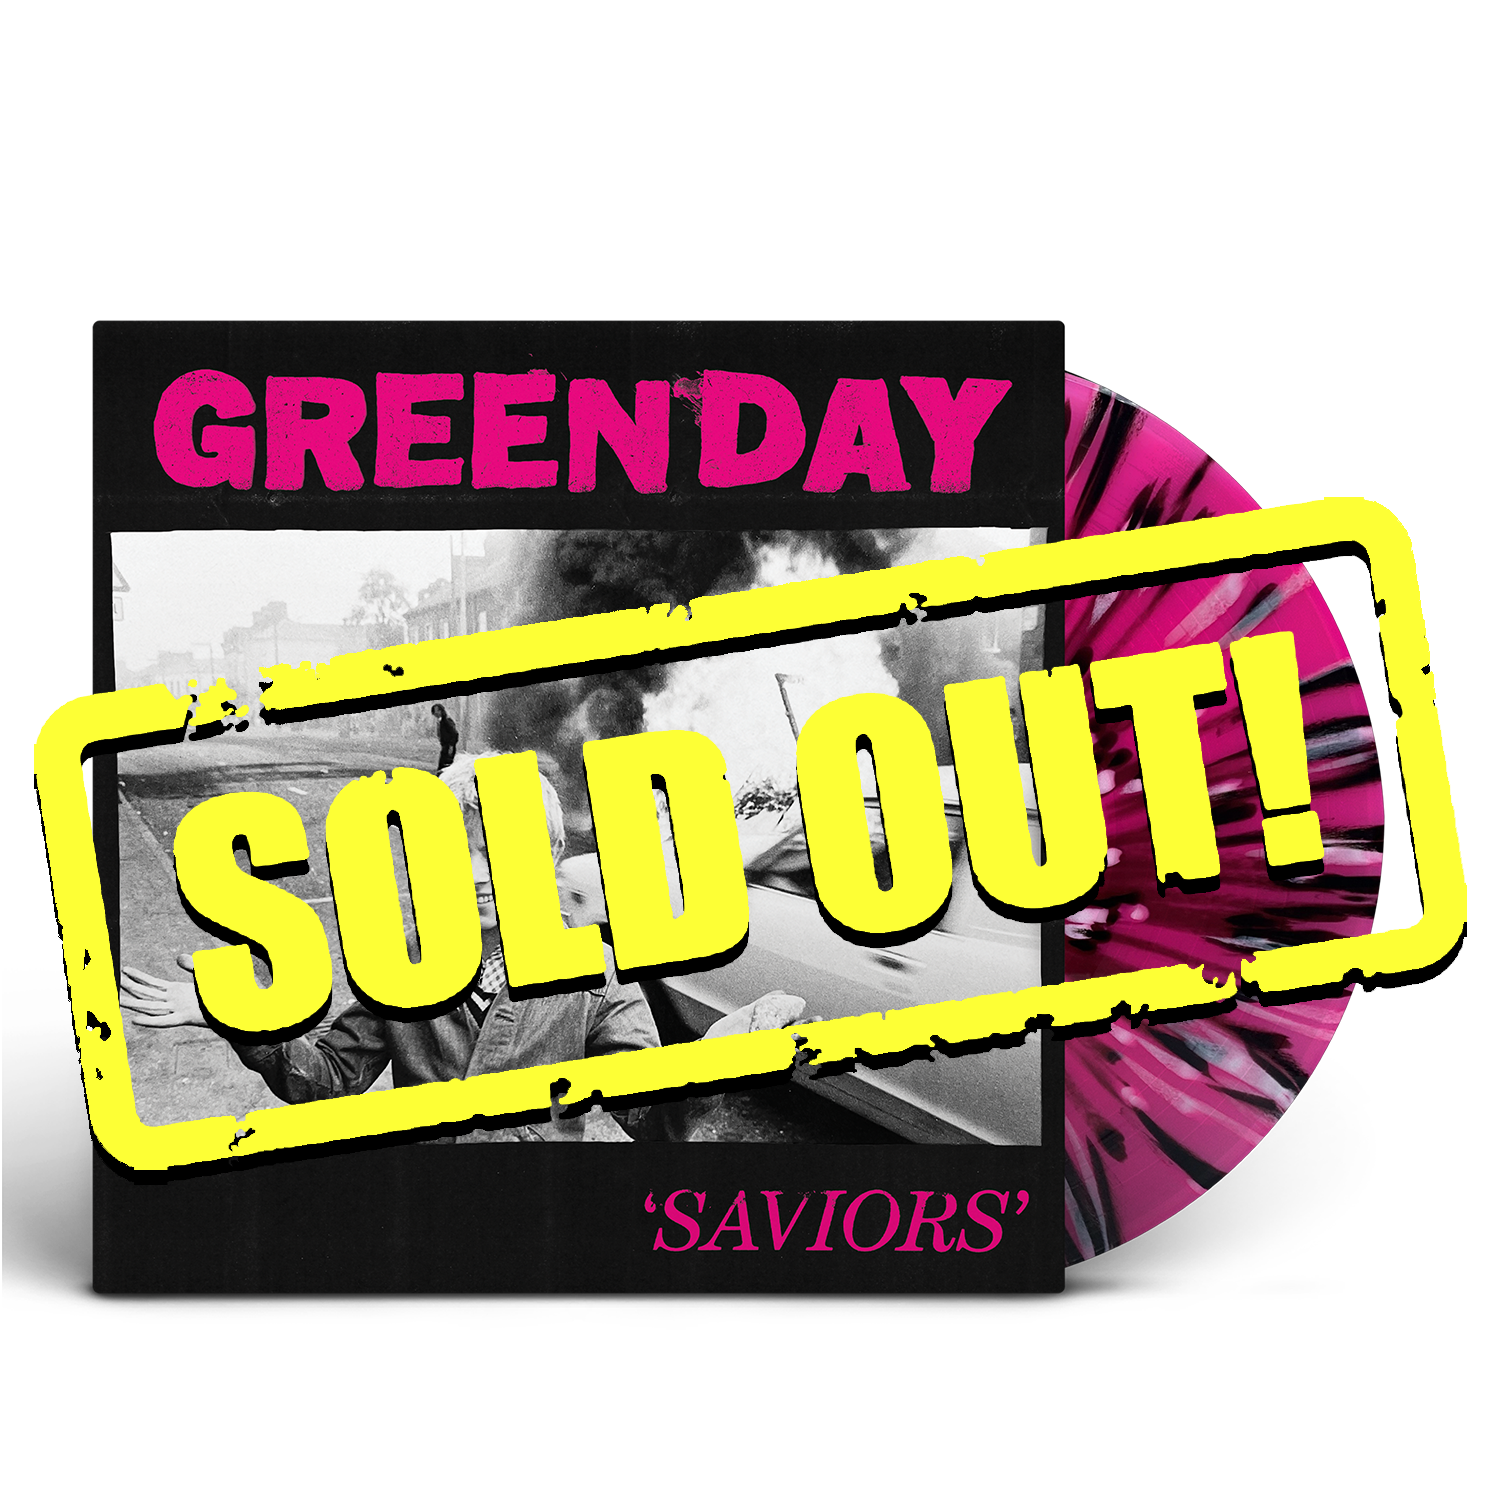 DS Record Radar: The many vinyl color variants of Green Day's new album  “Saviors” (and where you can buy them)